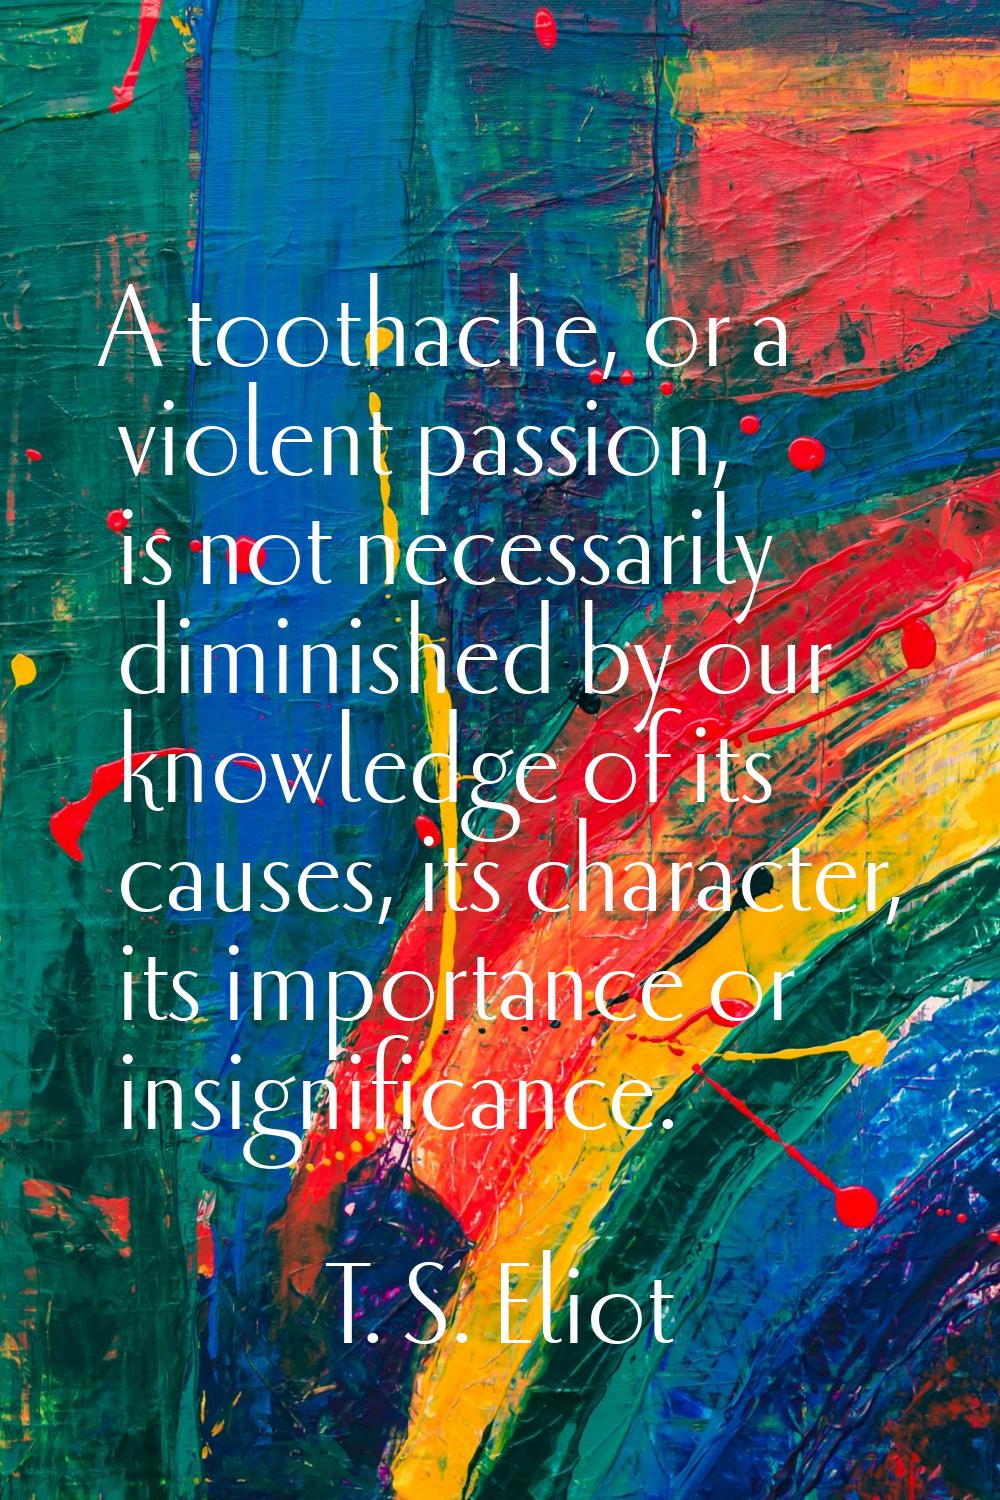 A toothache, or a violent passion, is not necessarily diminished by our knowledge of its causes, it